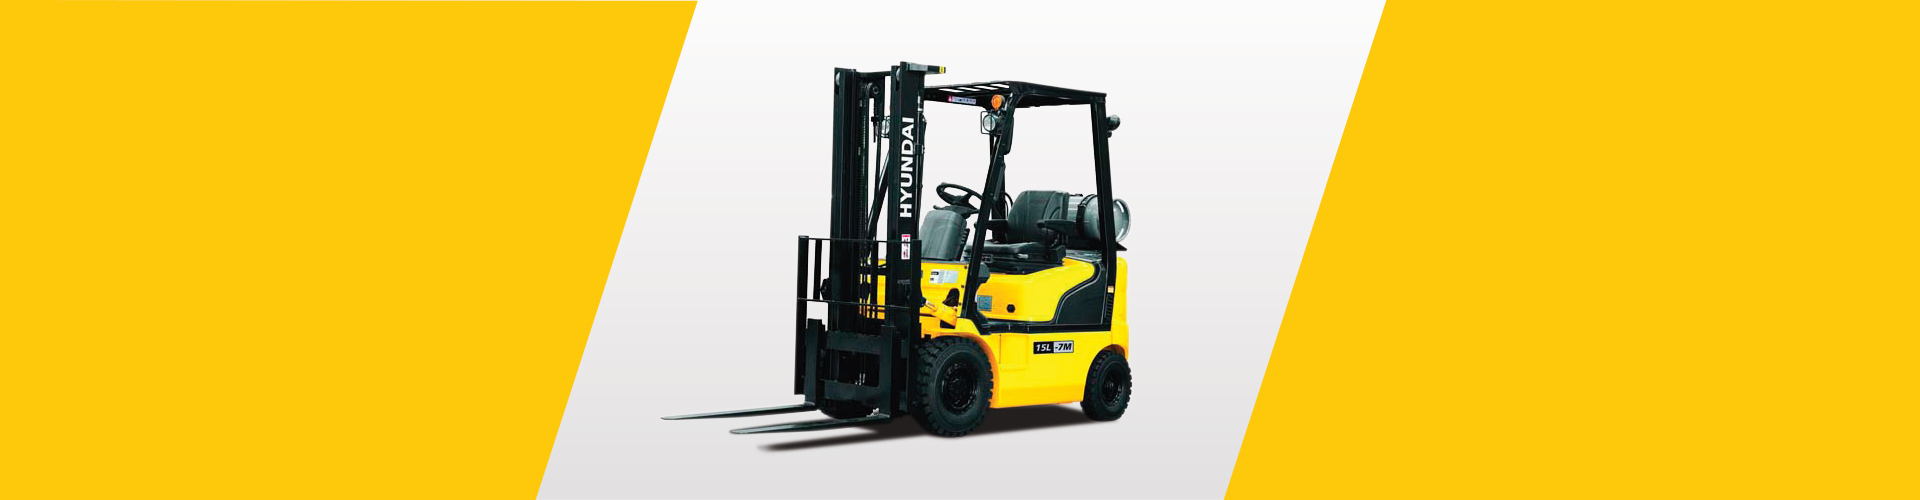 In Forklift Hire